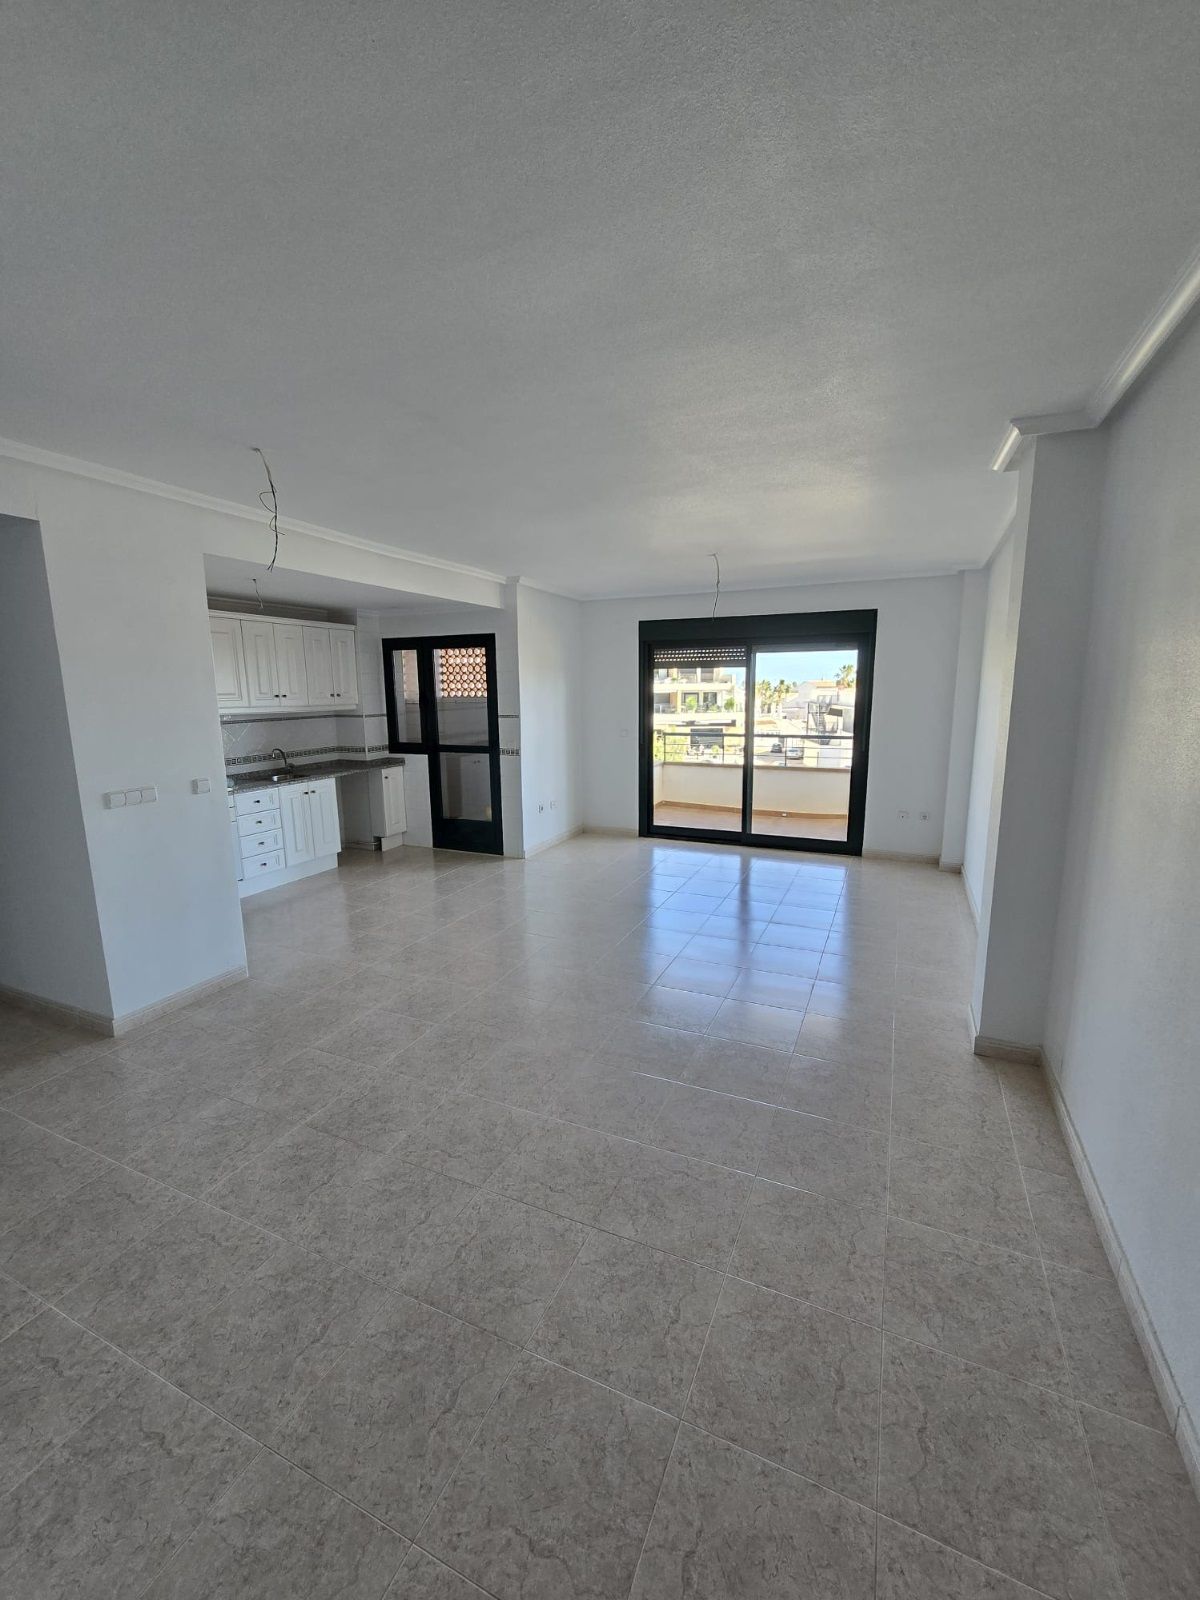 BRAND NEW APARTMENT IN CAMPOAMOR GOLF COURSE